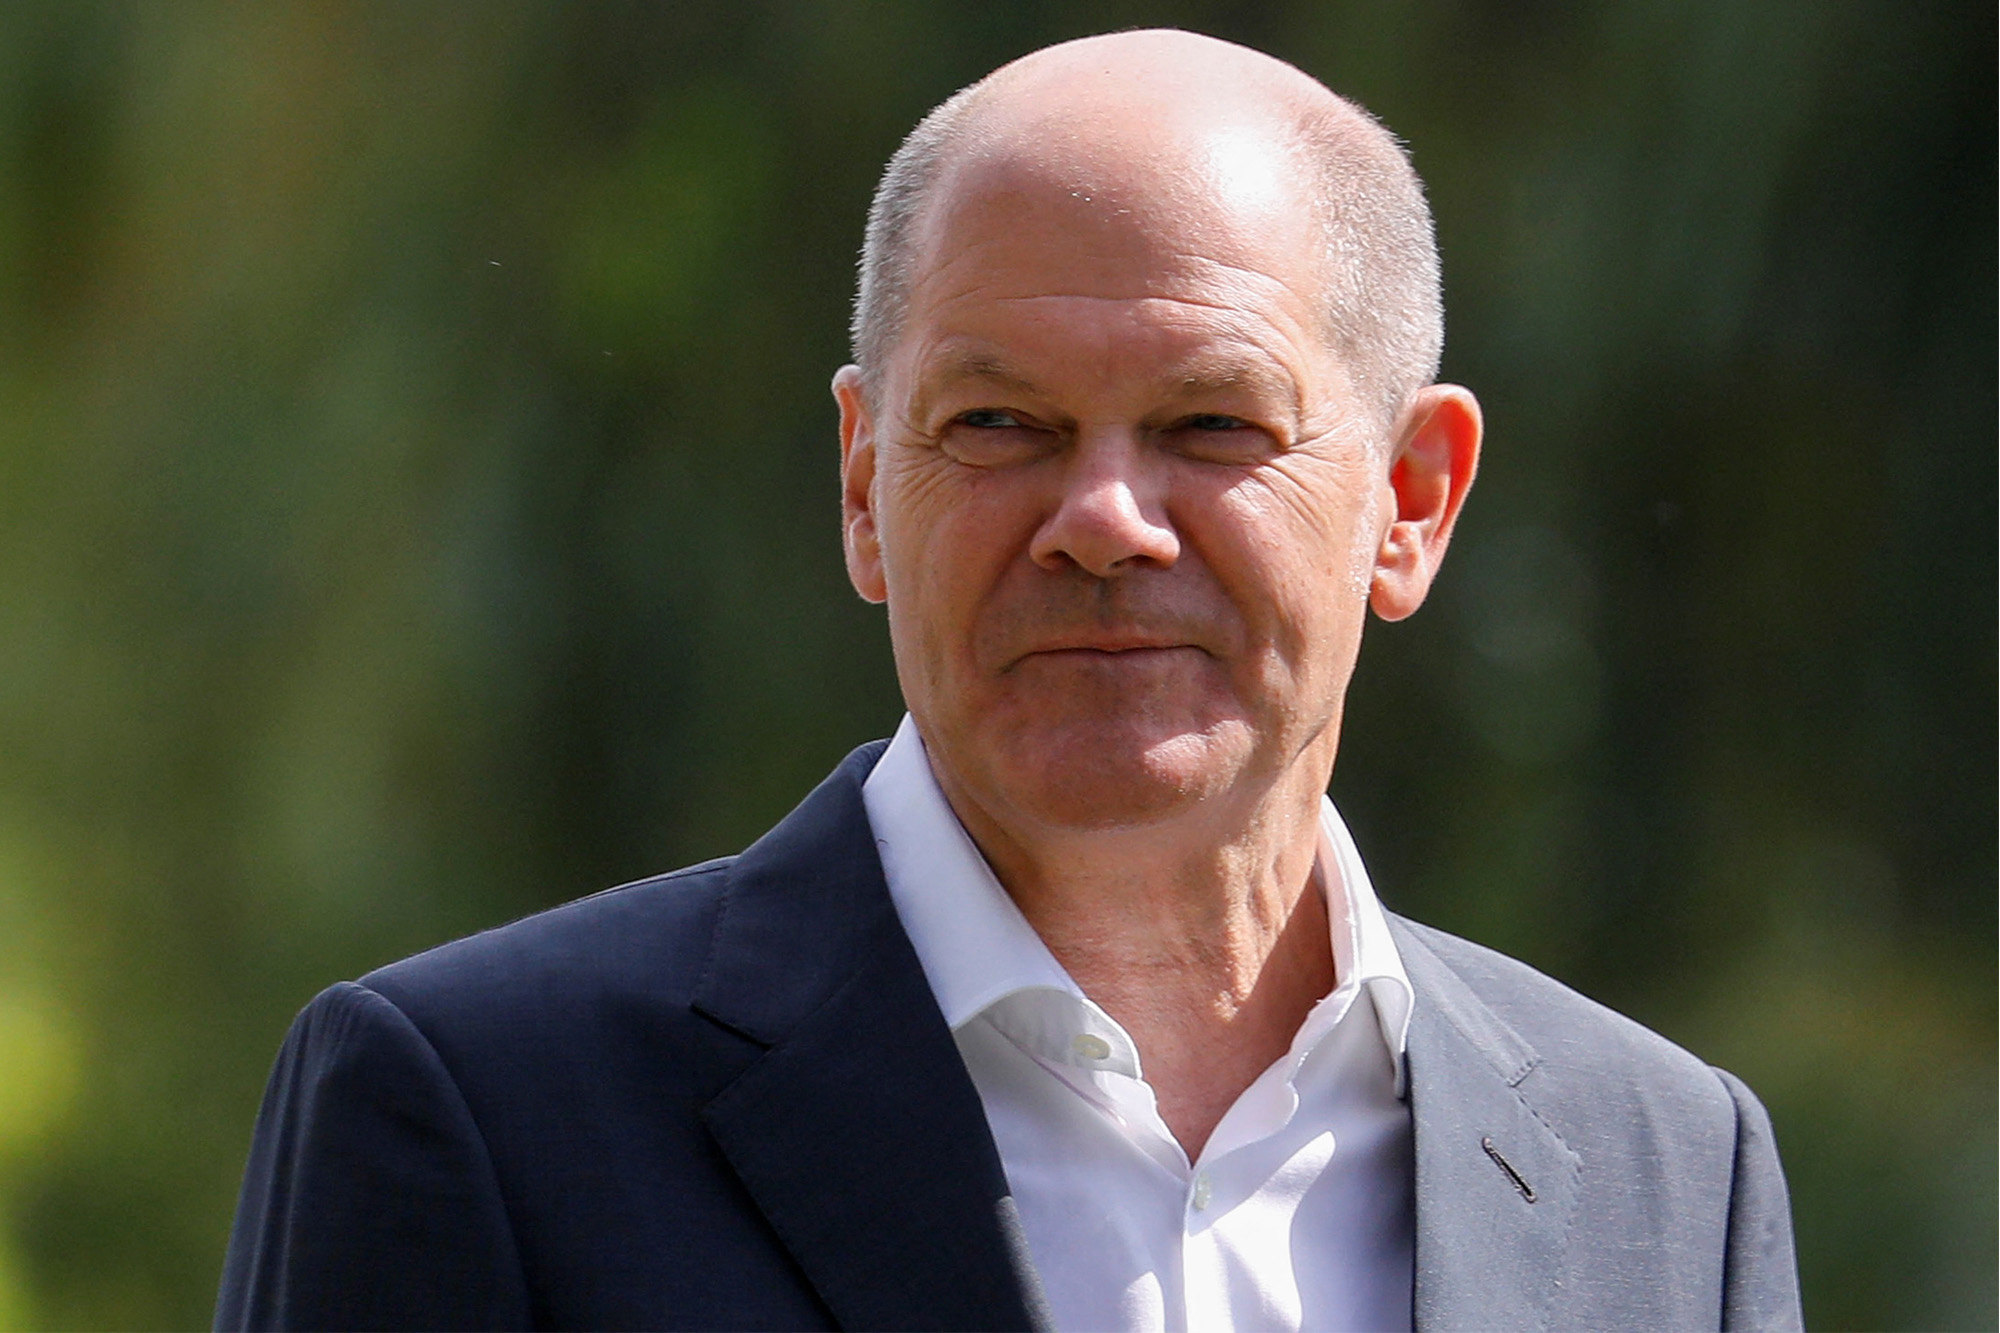 German Chancellor Olaf Scholz's commitment to supporting Ukraine amid the Russian invasion may waver as his country heads towards an energy crisis.